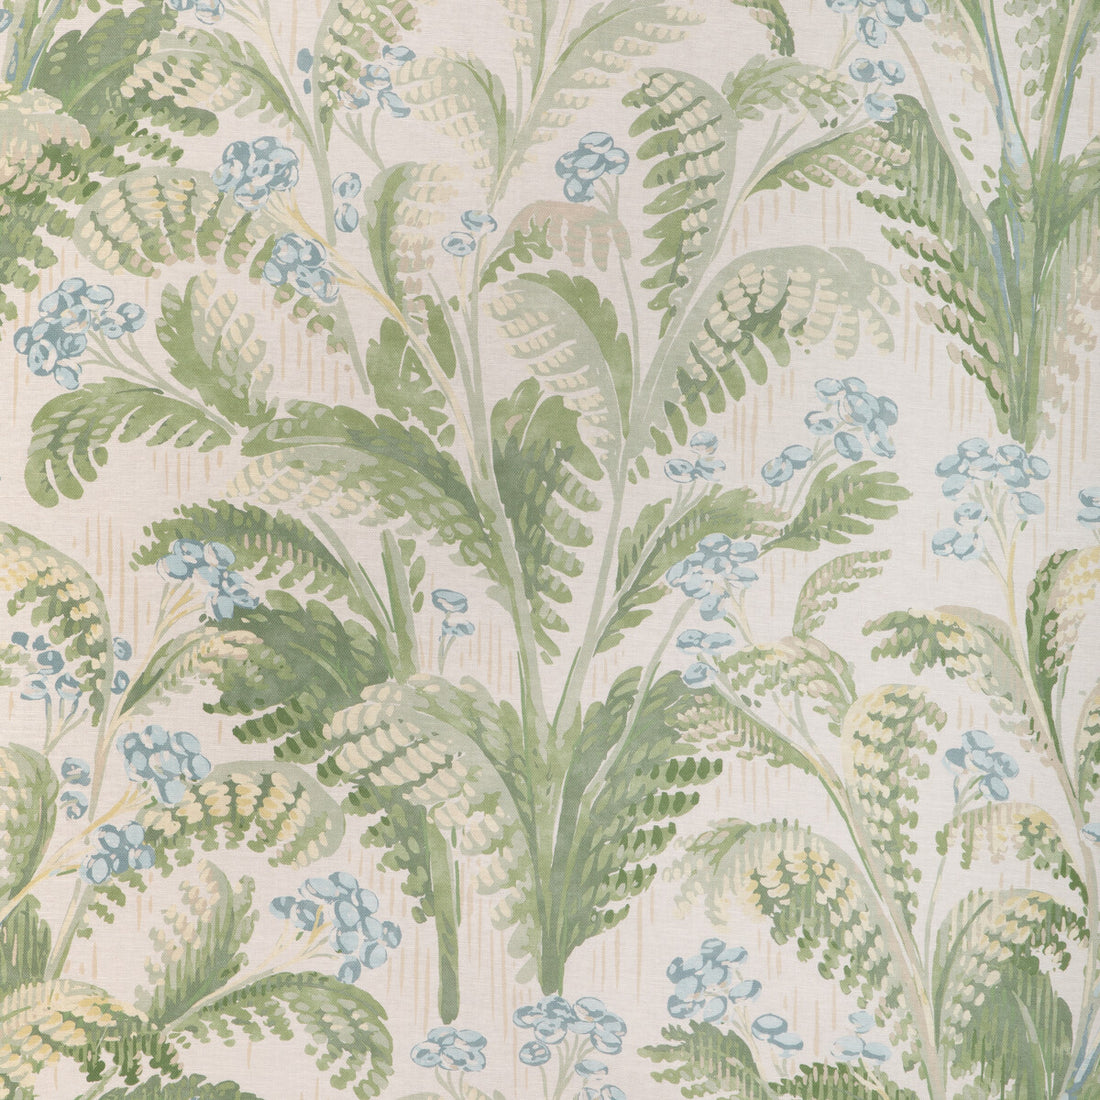 Pashley Print fabric in sky color - pattern 2023140.153.0 - by Lee Jofa in the Garden Walk collection